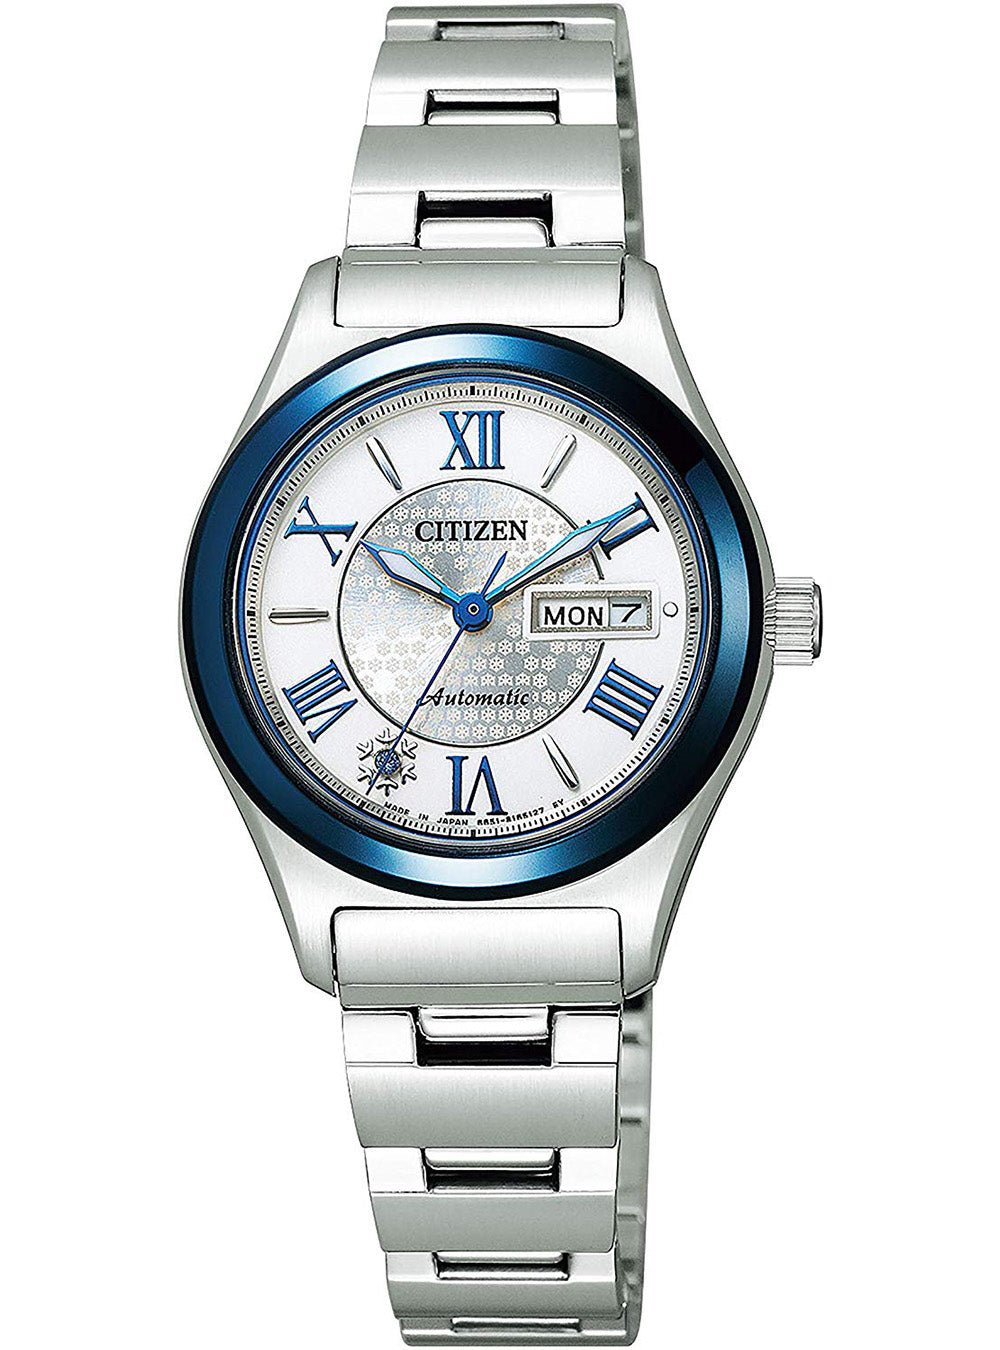 CITIZEN COLLECTION LIMITED MODEL PD7165-65A MADE IN JAPAN